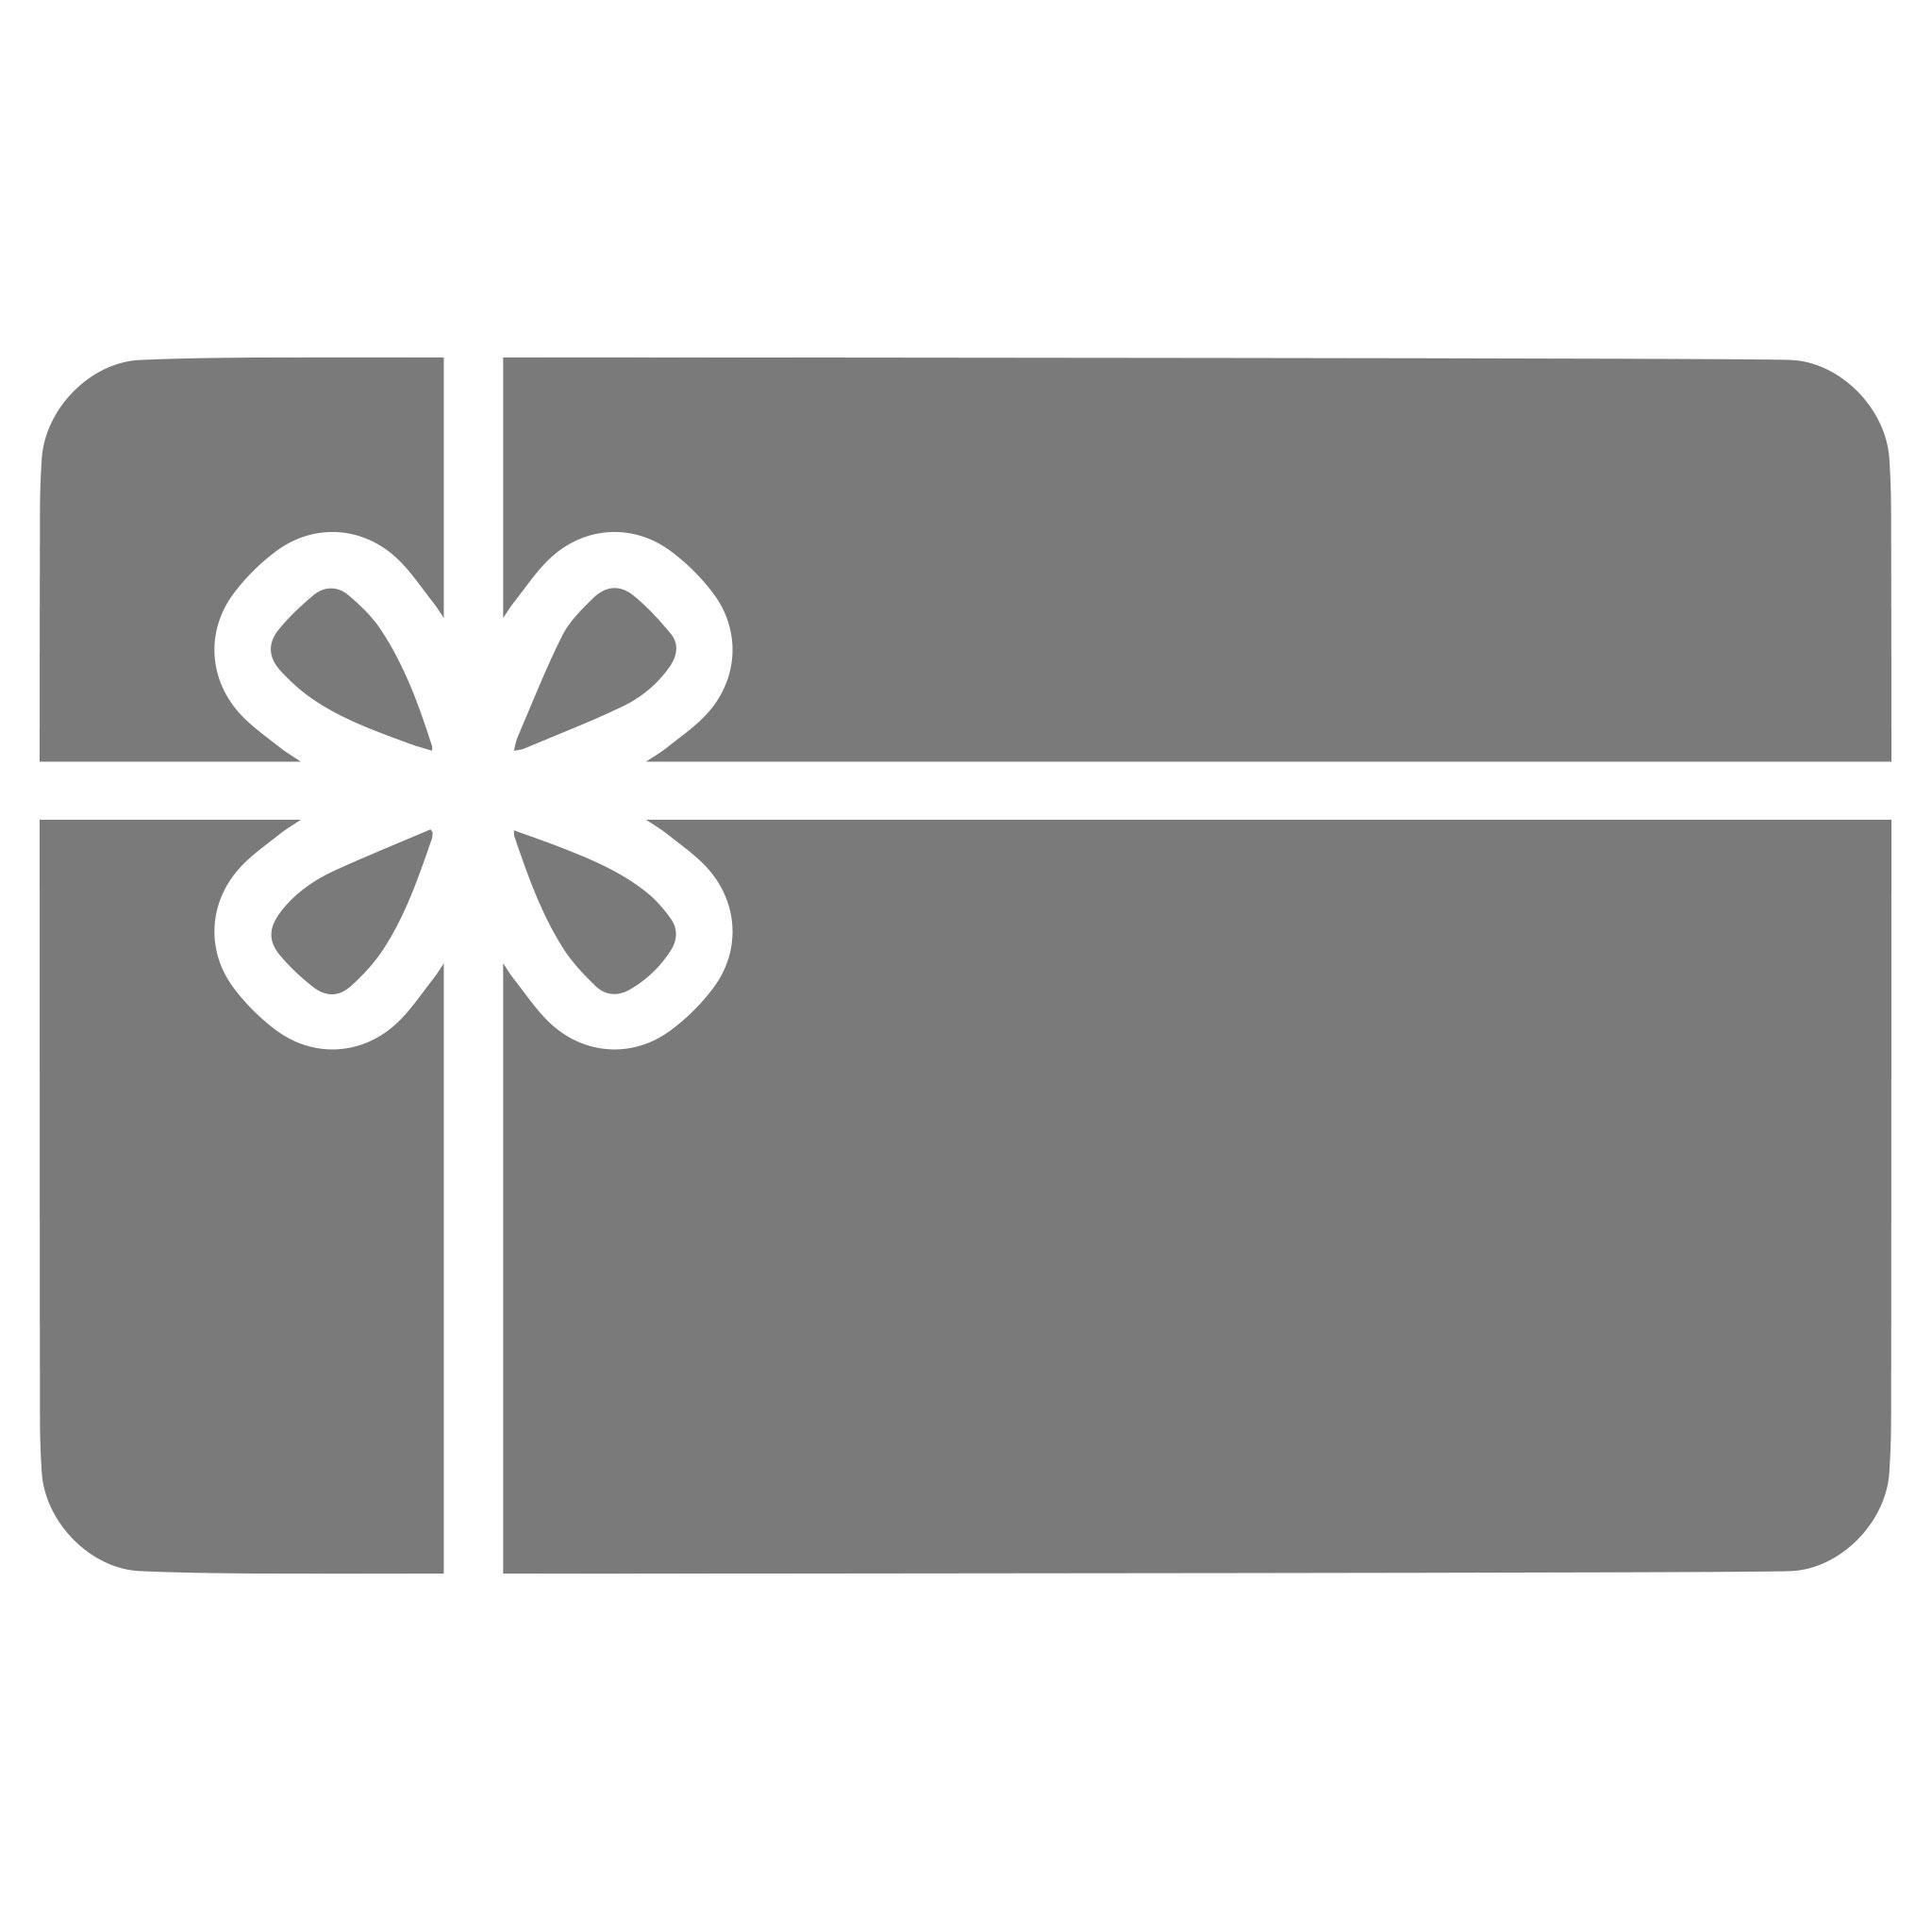 "The Anime Accessories Store" Gift Card